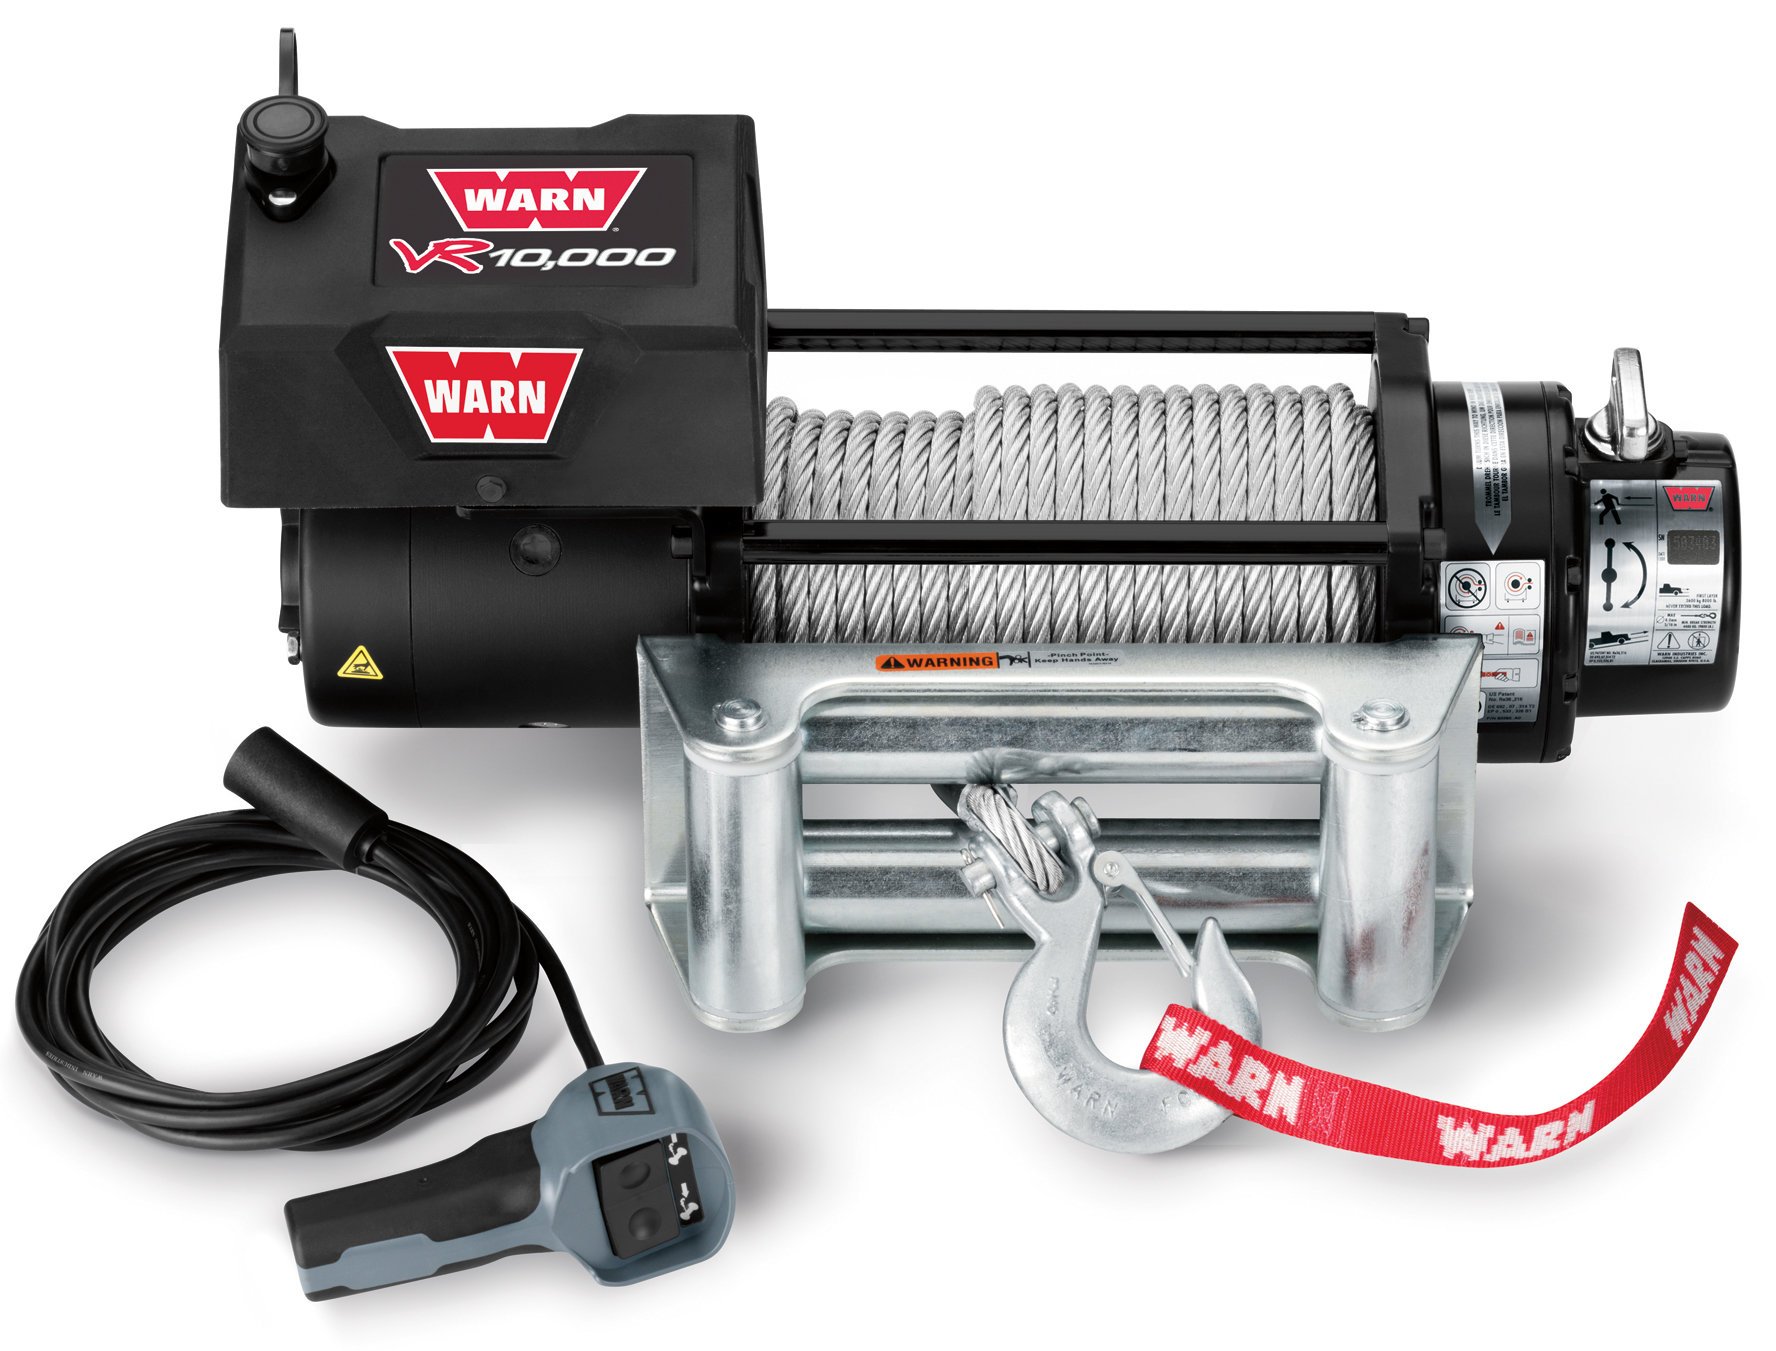 WARN 86255 VR10000 Winch with 94' Wire Rope and Roller ... alpine wire diagram 